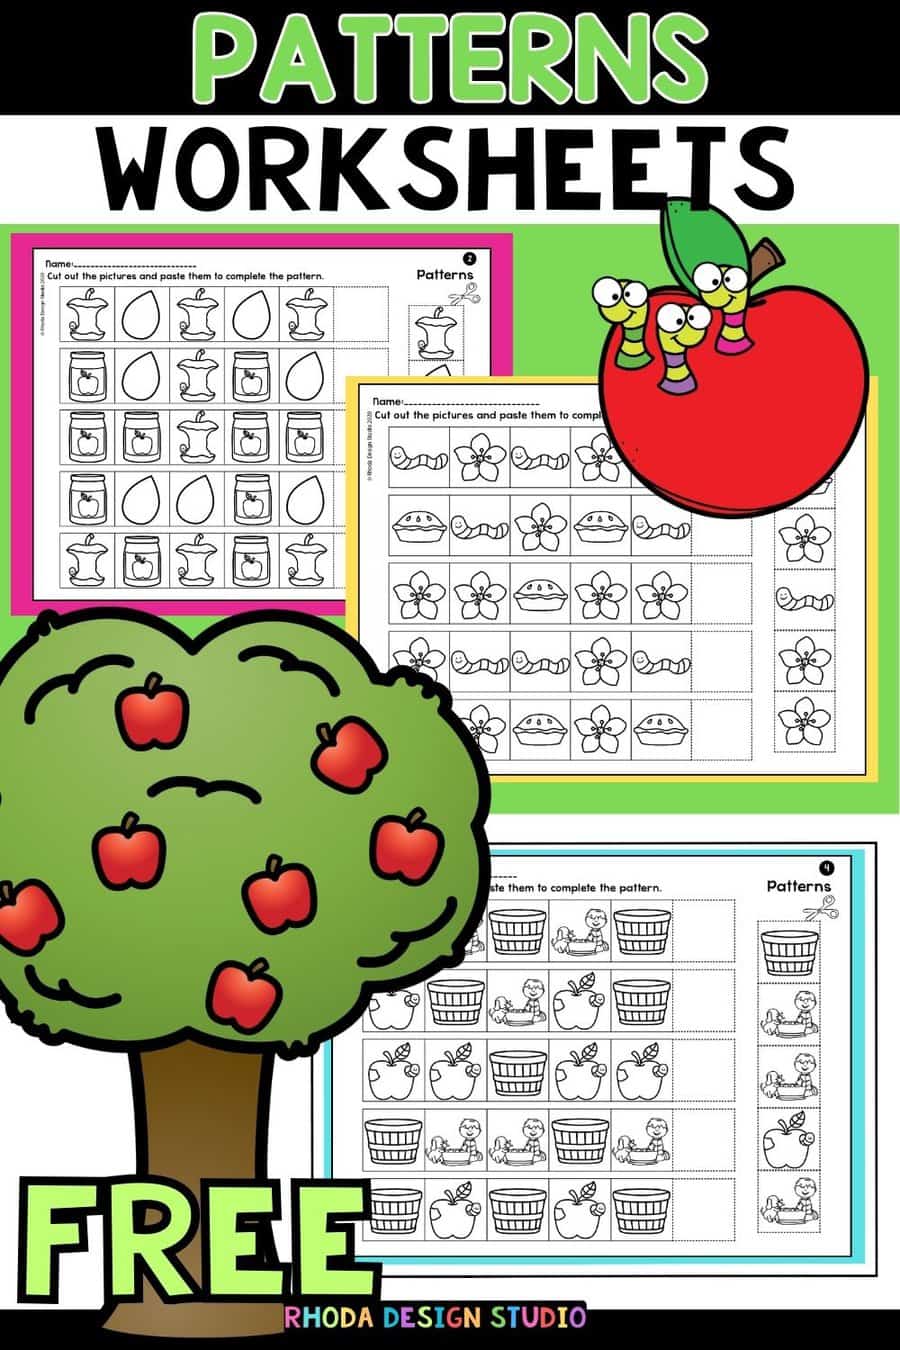 Looking to challenge your little one's brain? Find the pattern with these engaging and free worksheets! Strengthen their problem-solving skills and have fun at the same time. Download now for endless learning opportunities! #patternworksheets #freeworksheets #findthepattern